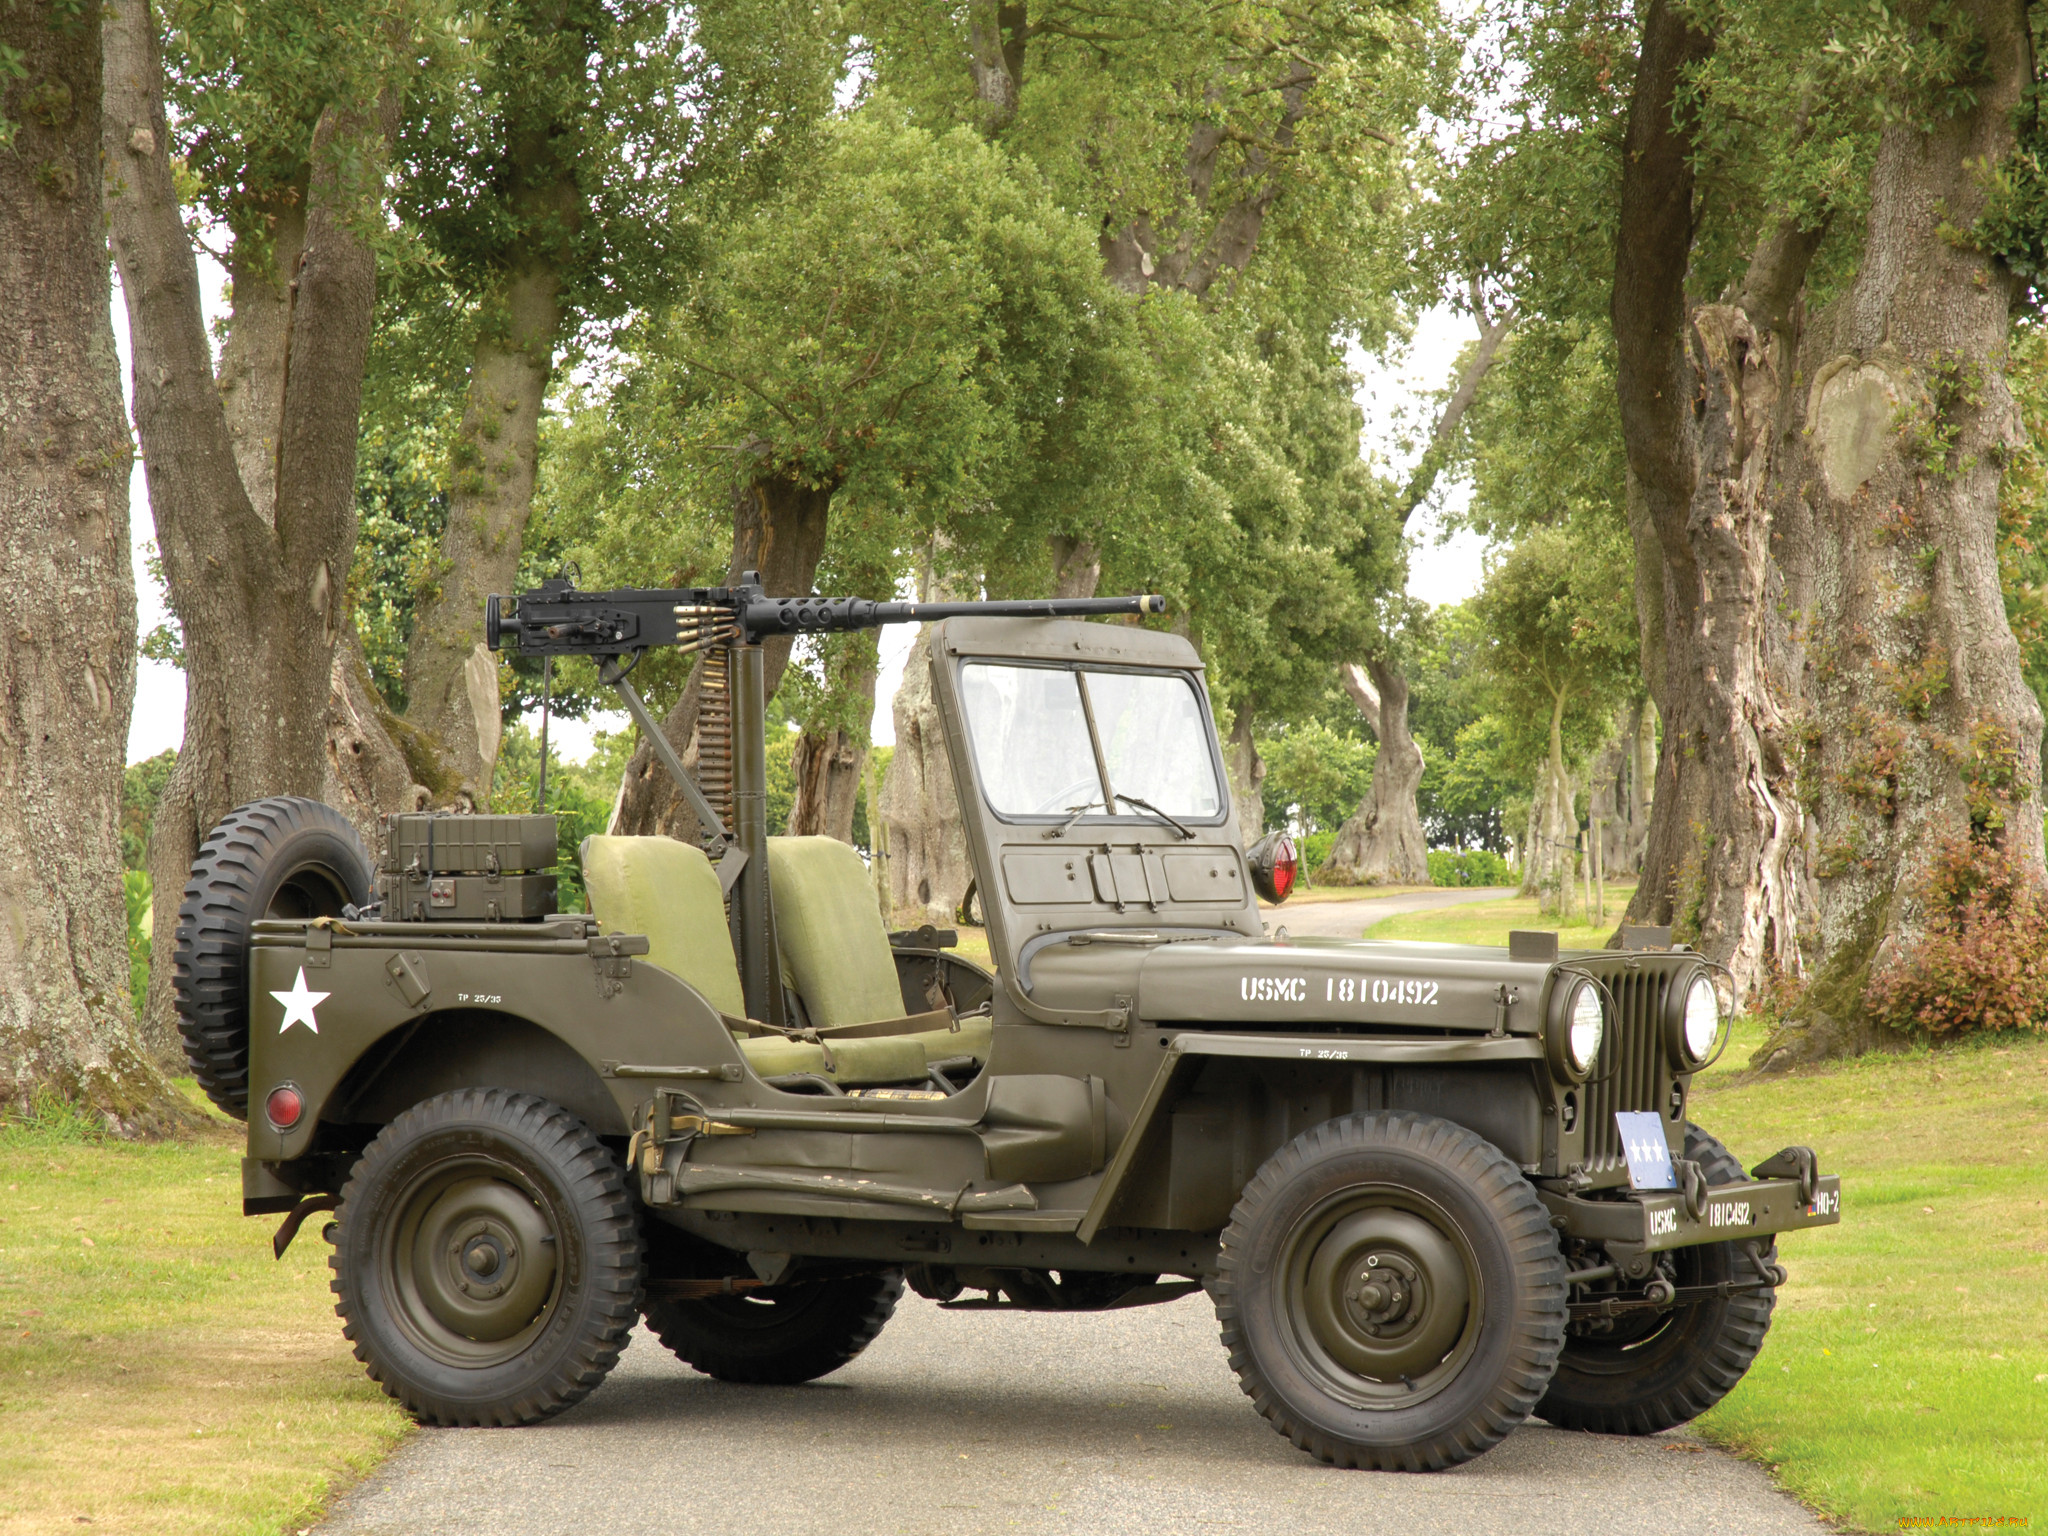 willys m38 jeep 1950, ,  , willys, m38, 1950, jeep